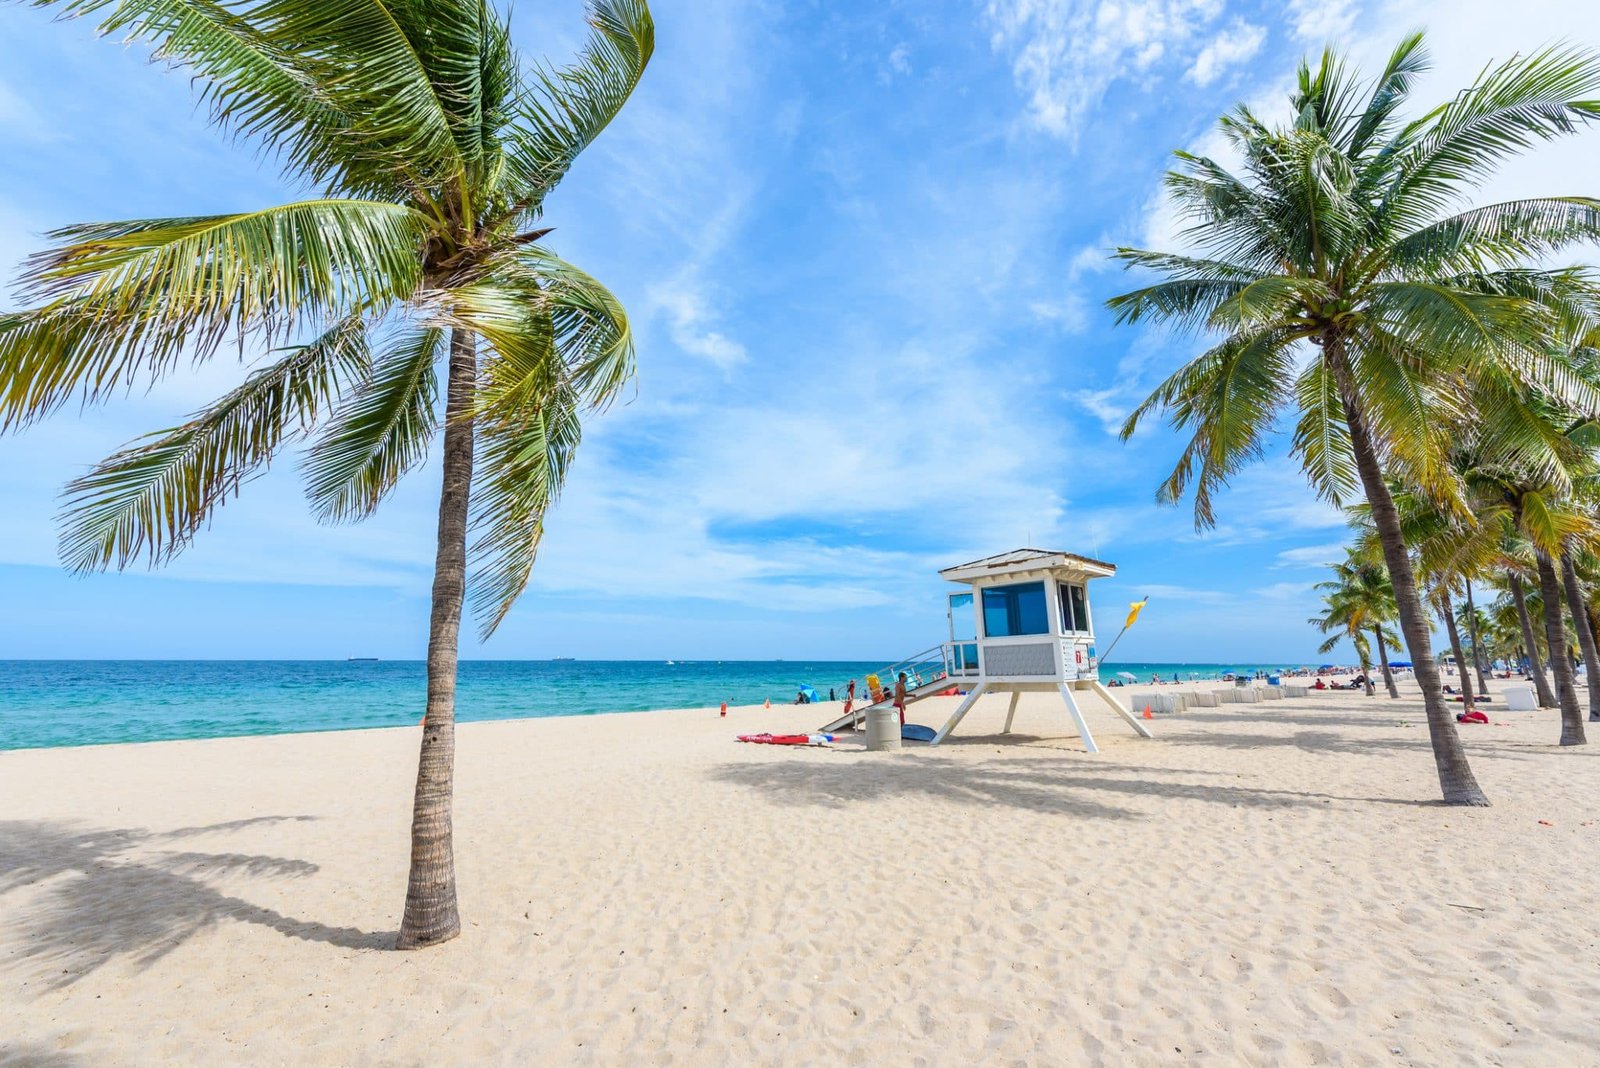 Paradise beach at Fort Lauderdale in Florida on a beautiful sumer day. Tropical beach with palms at white beach.